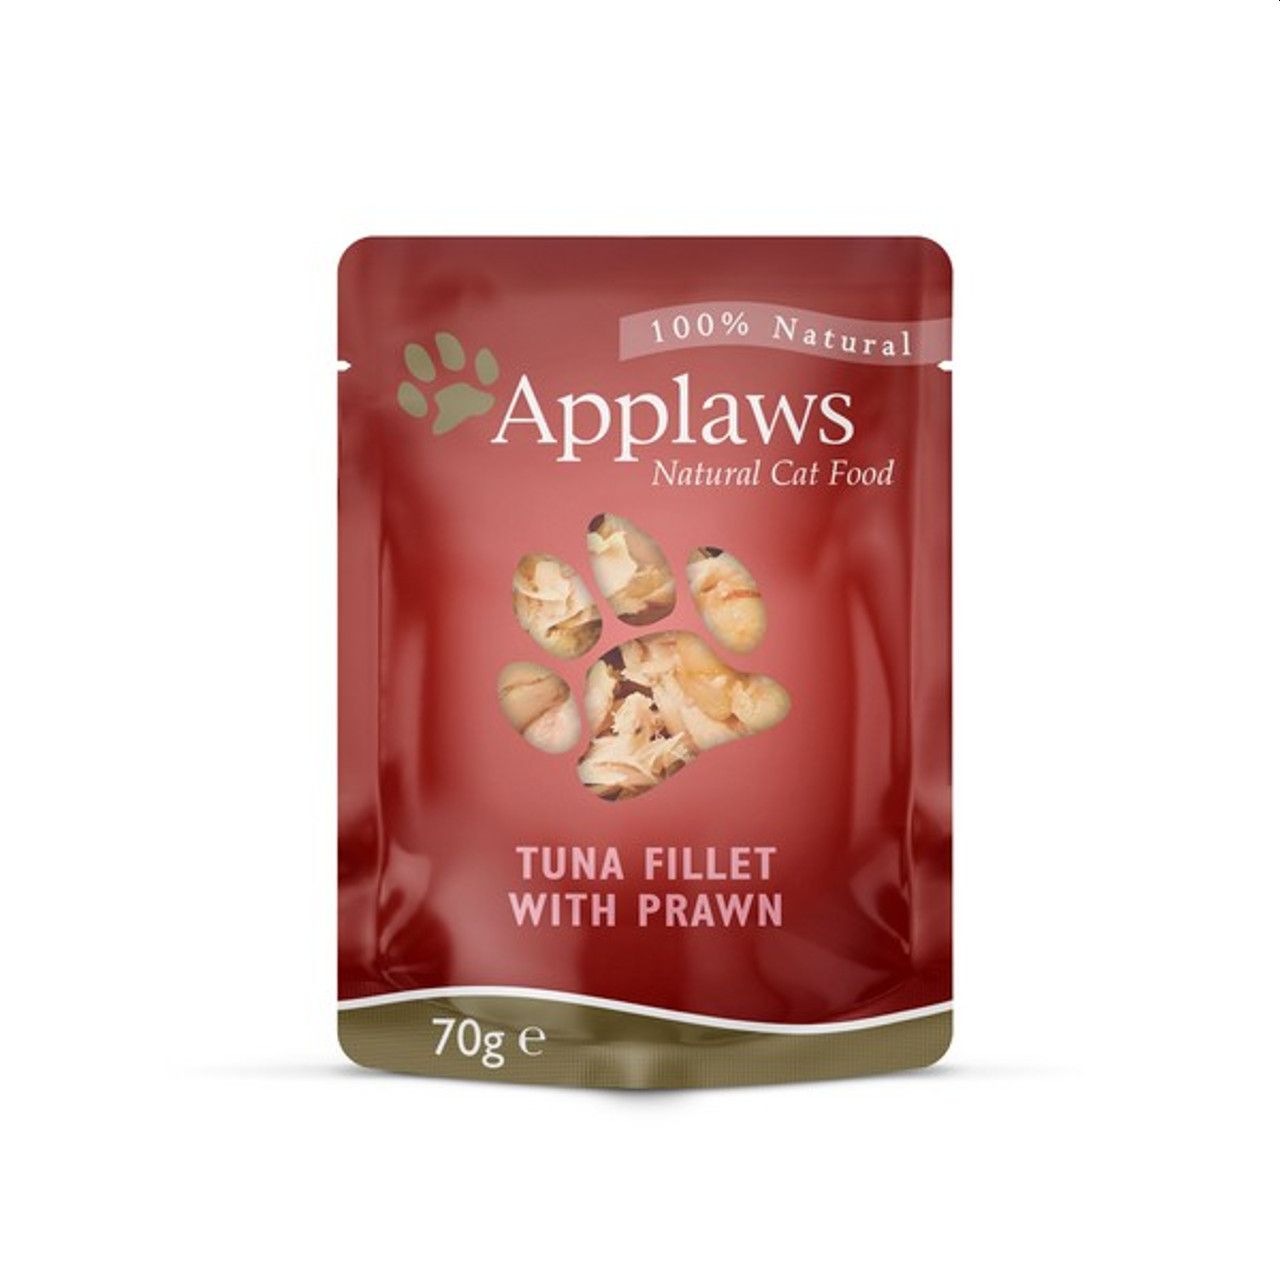 Applaws Tuna Fillet with Prawn Pouches